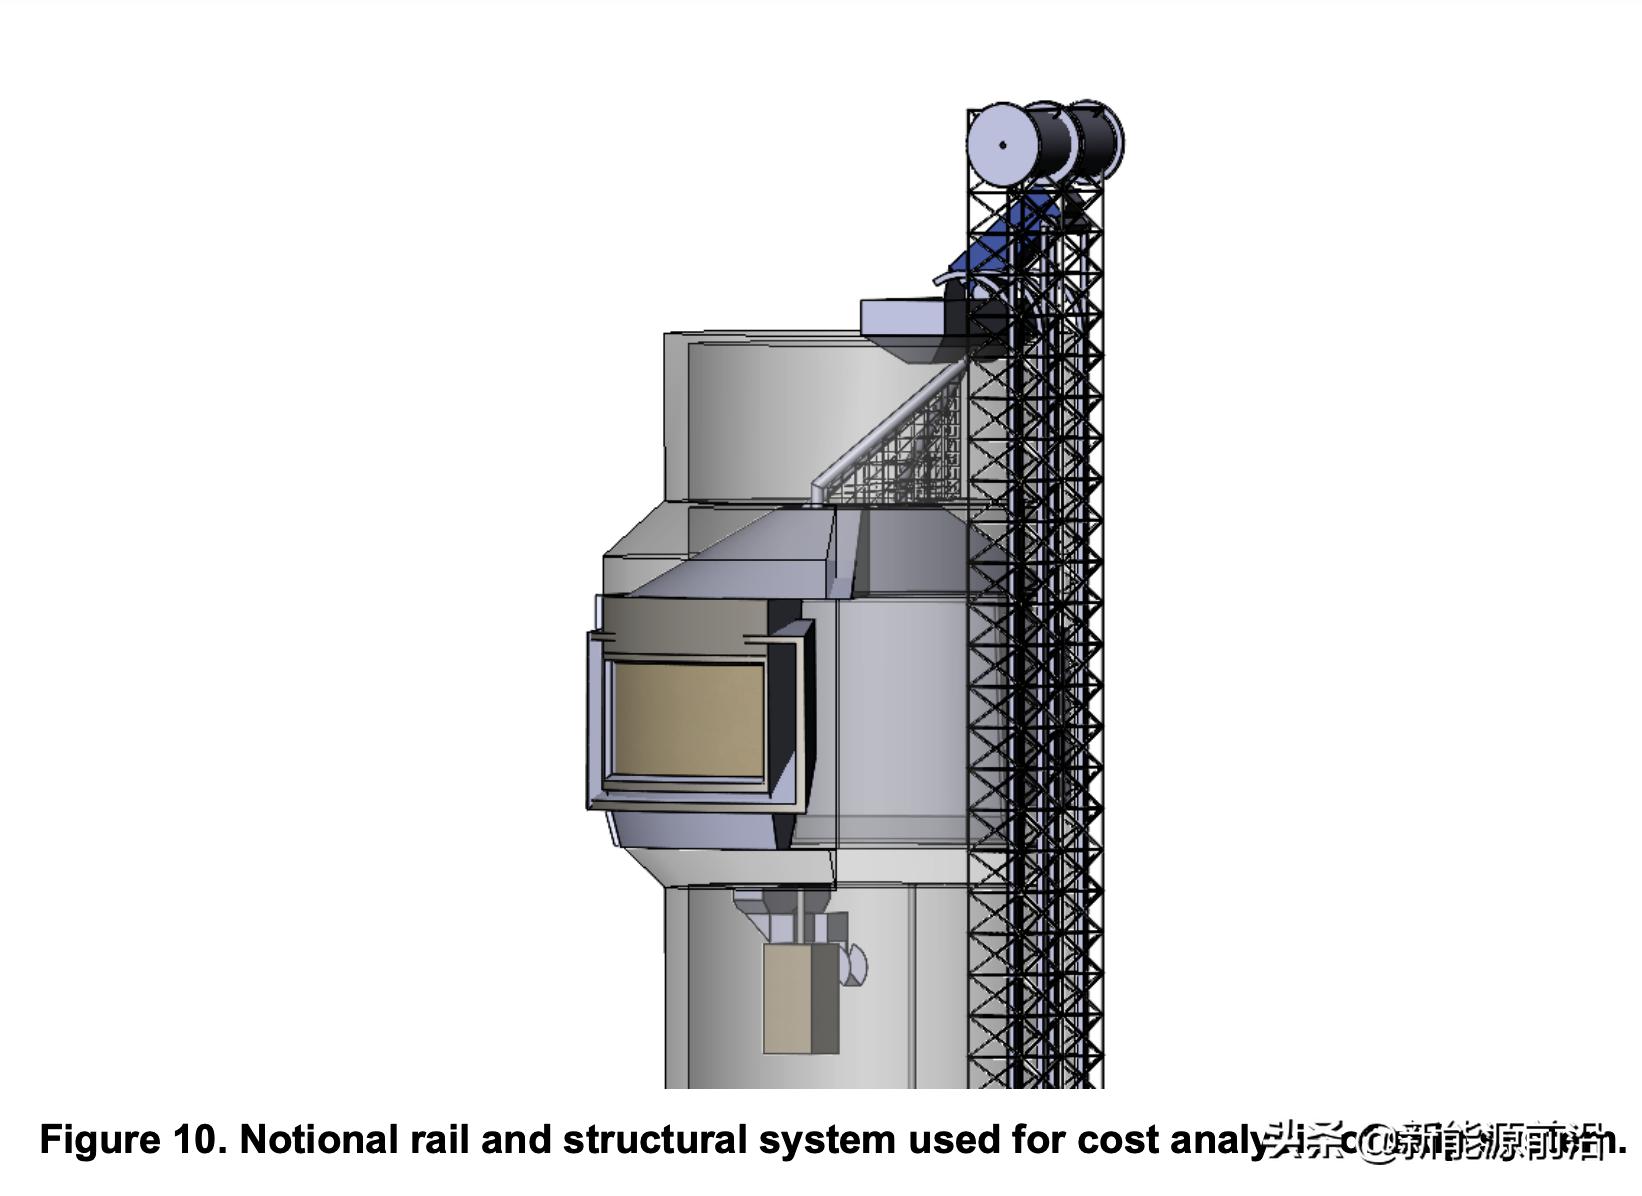 How will the pellet tower CSP system lift several tons of hot sand?